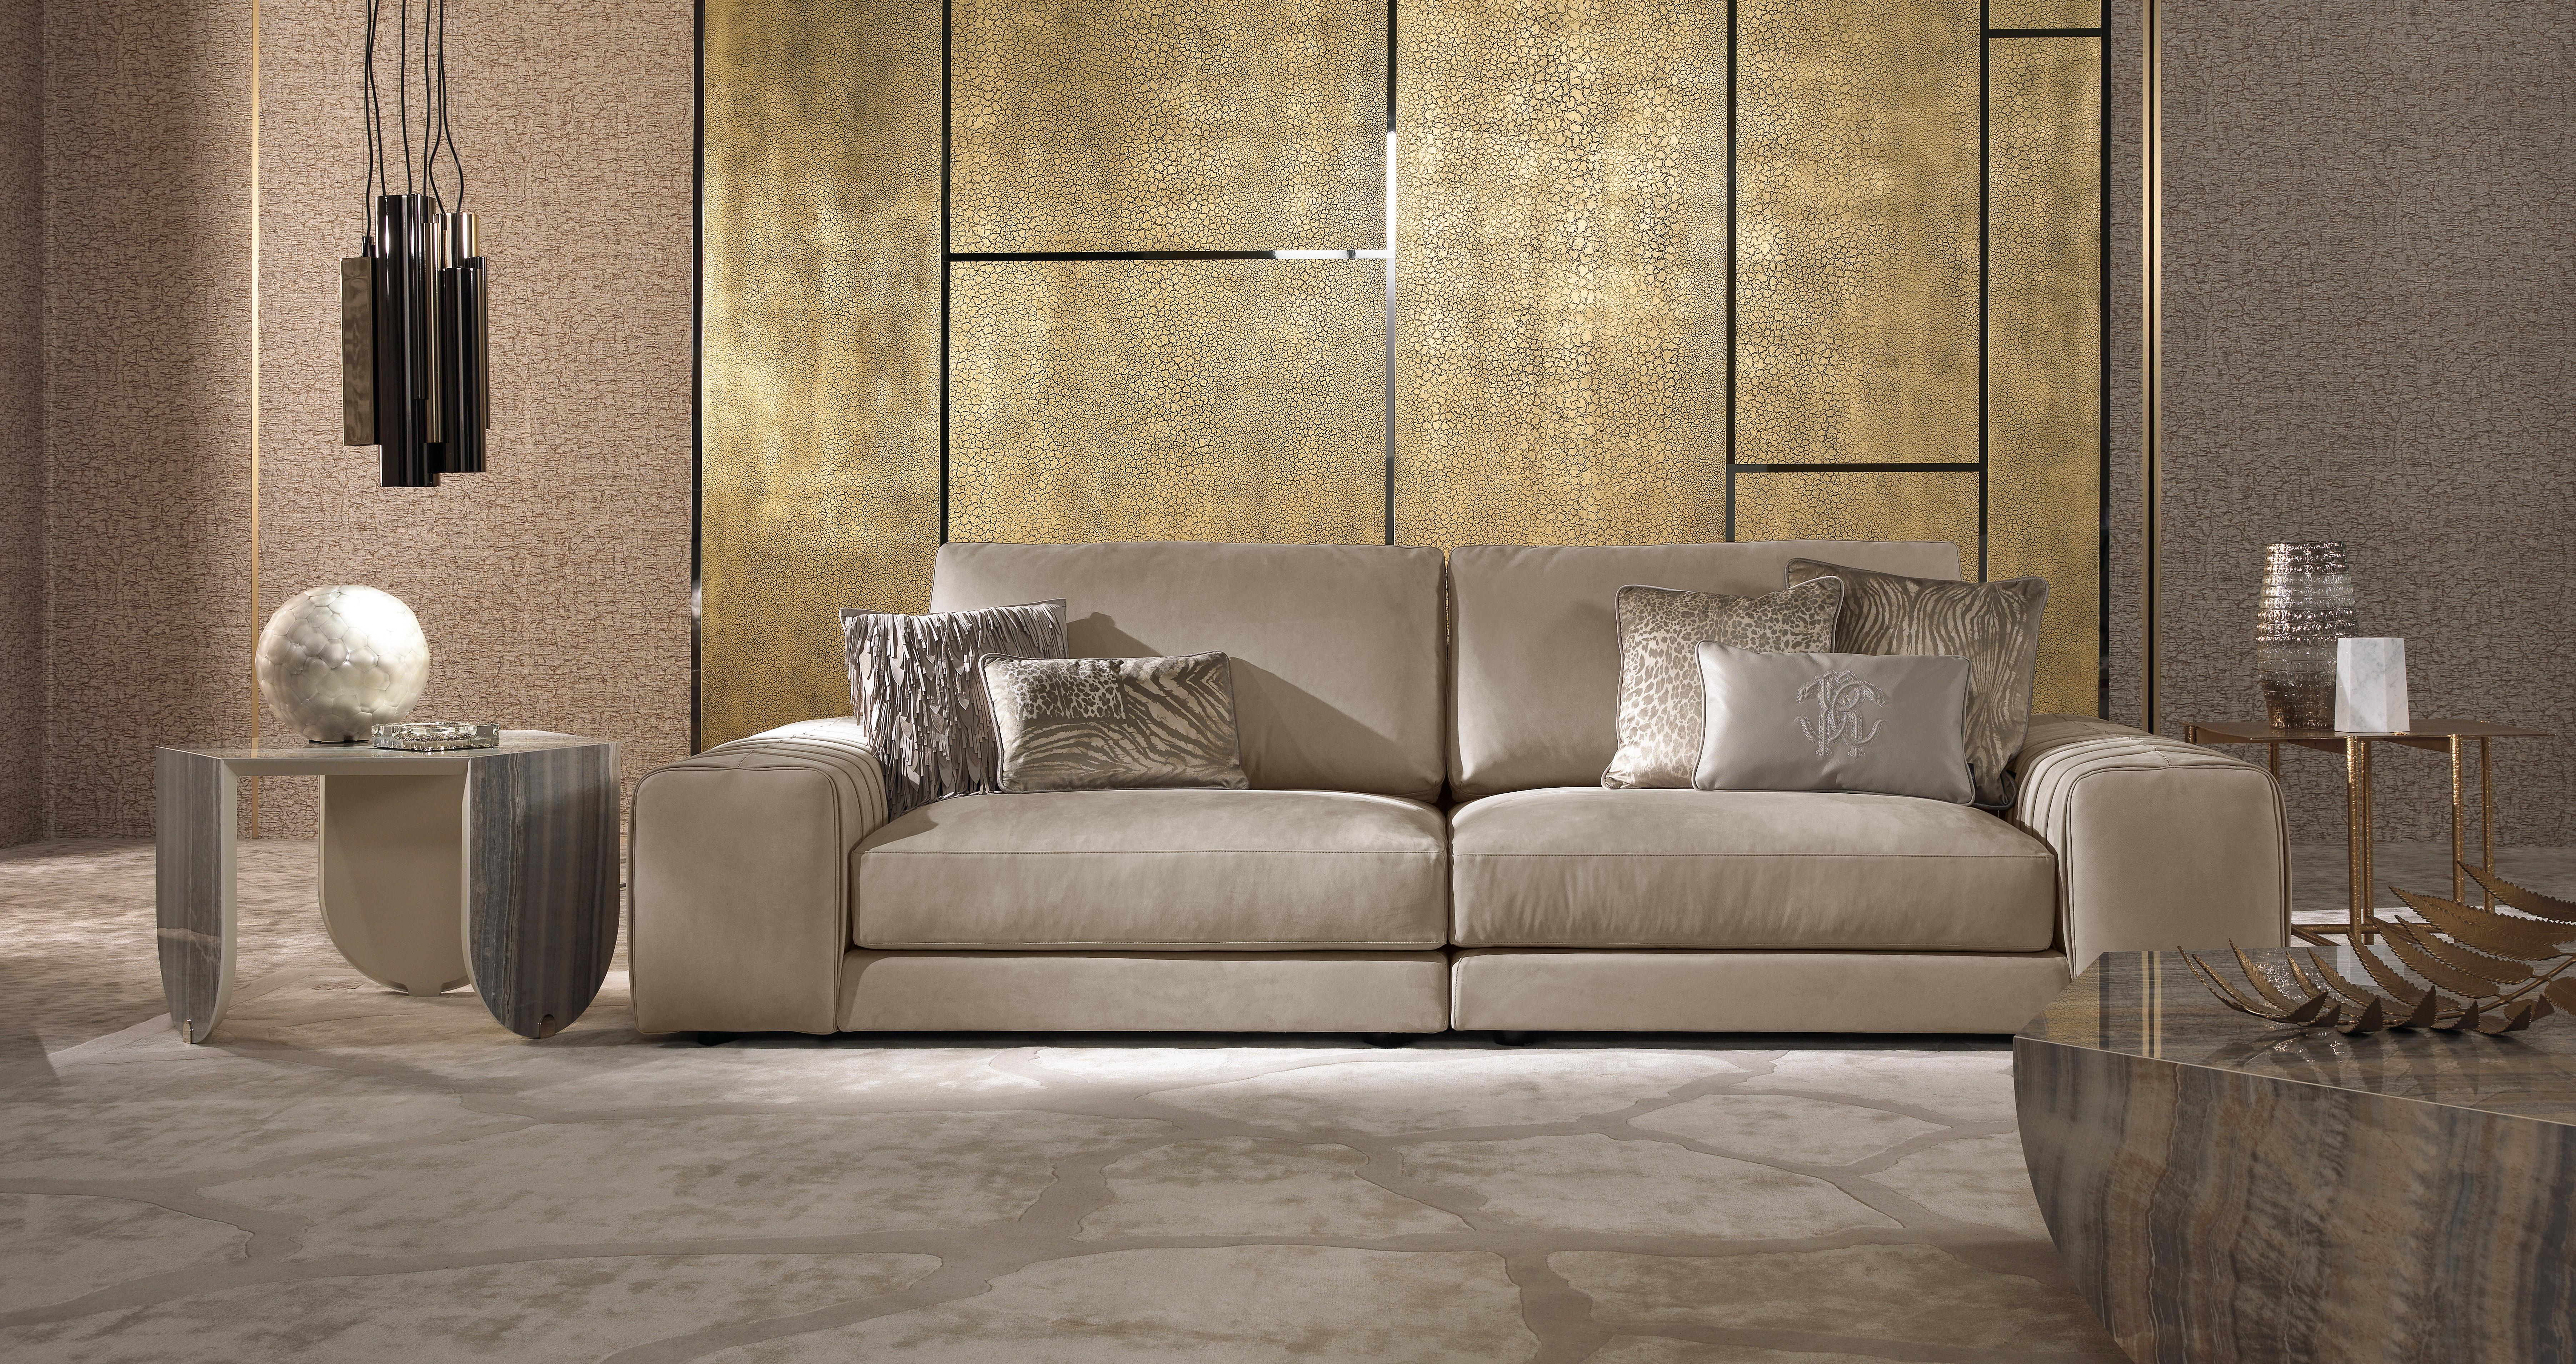 Contemporary 21st Century Kingston Sofa in Leather by Roberto Cavalli Home Interiors For Sale